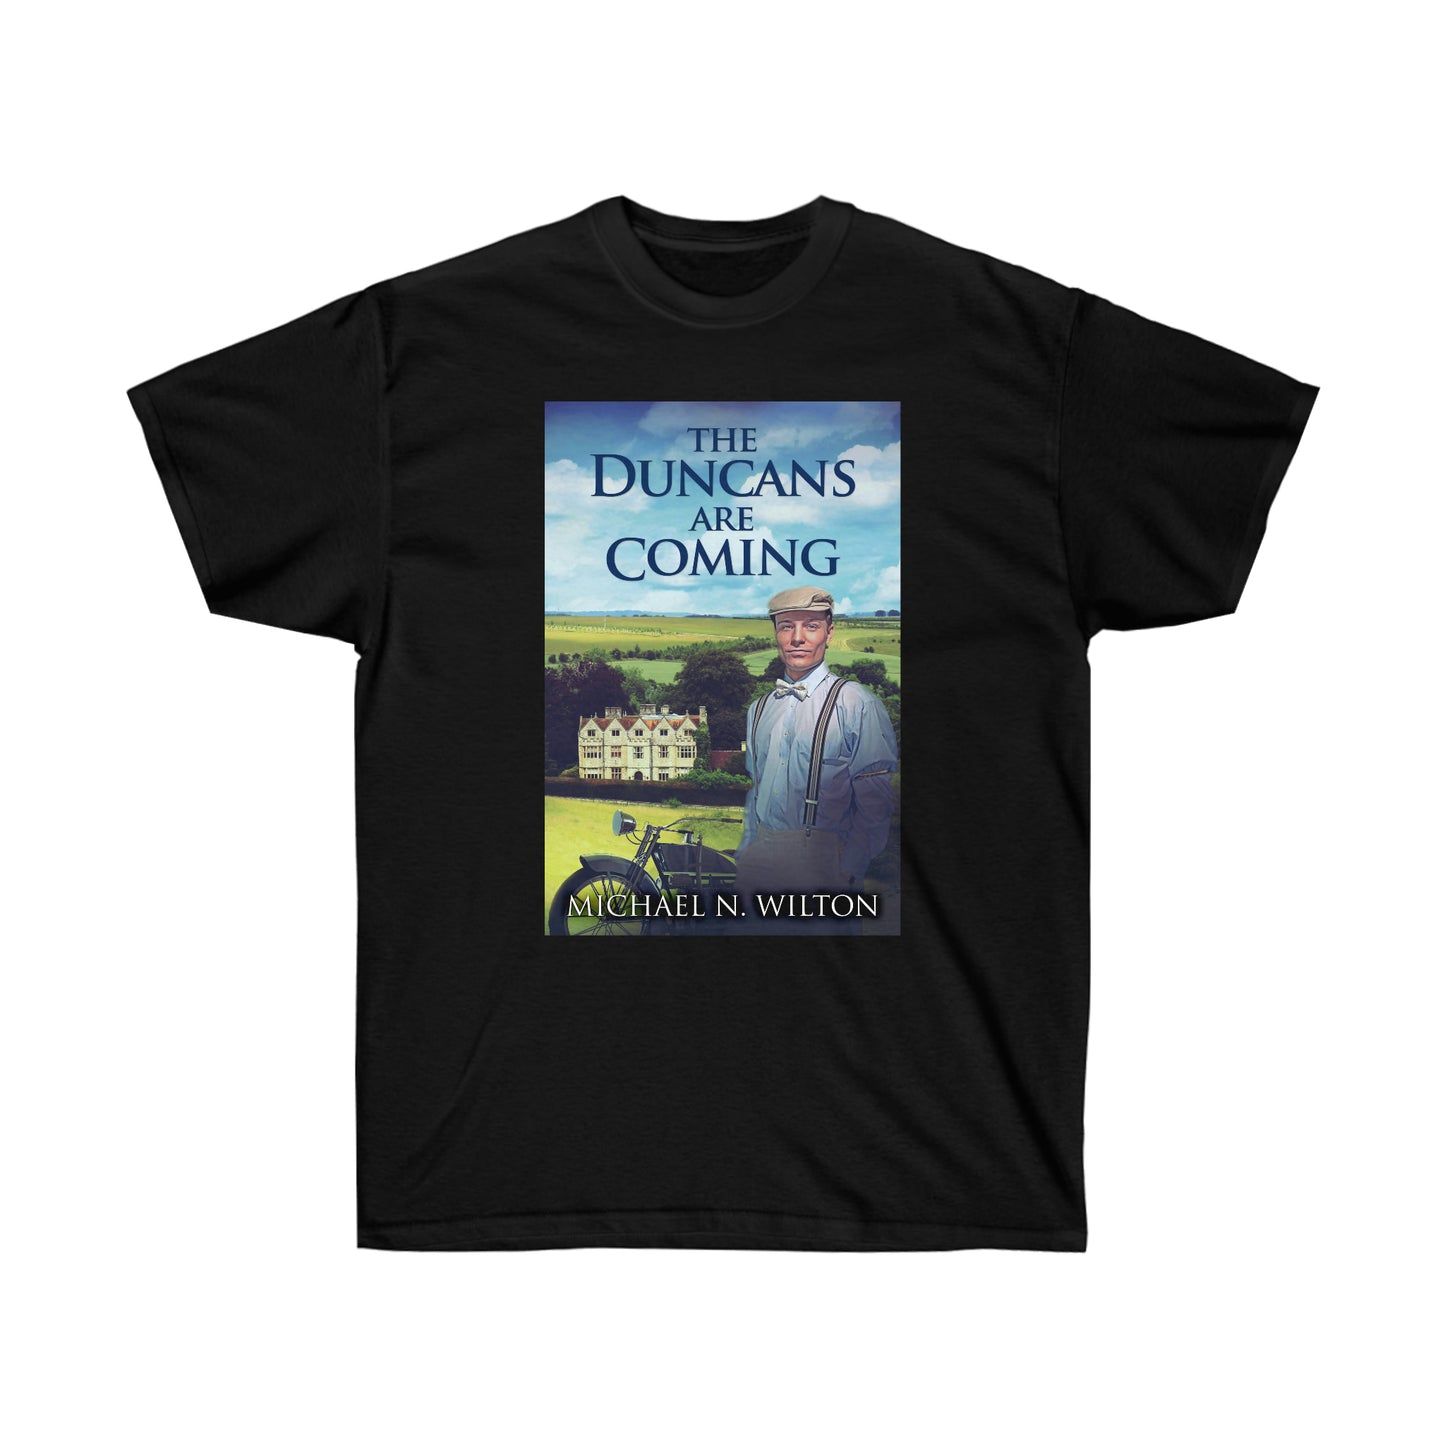 The Duncans Are Coming - Unisex T-Shirt